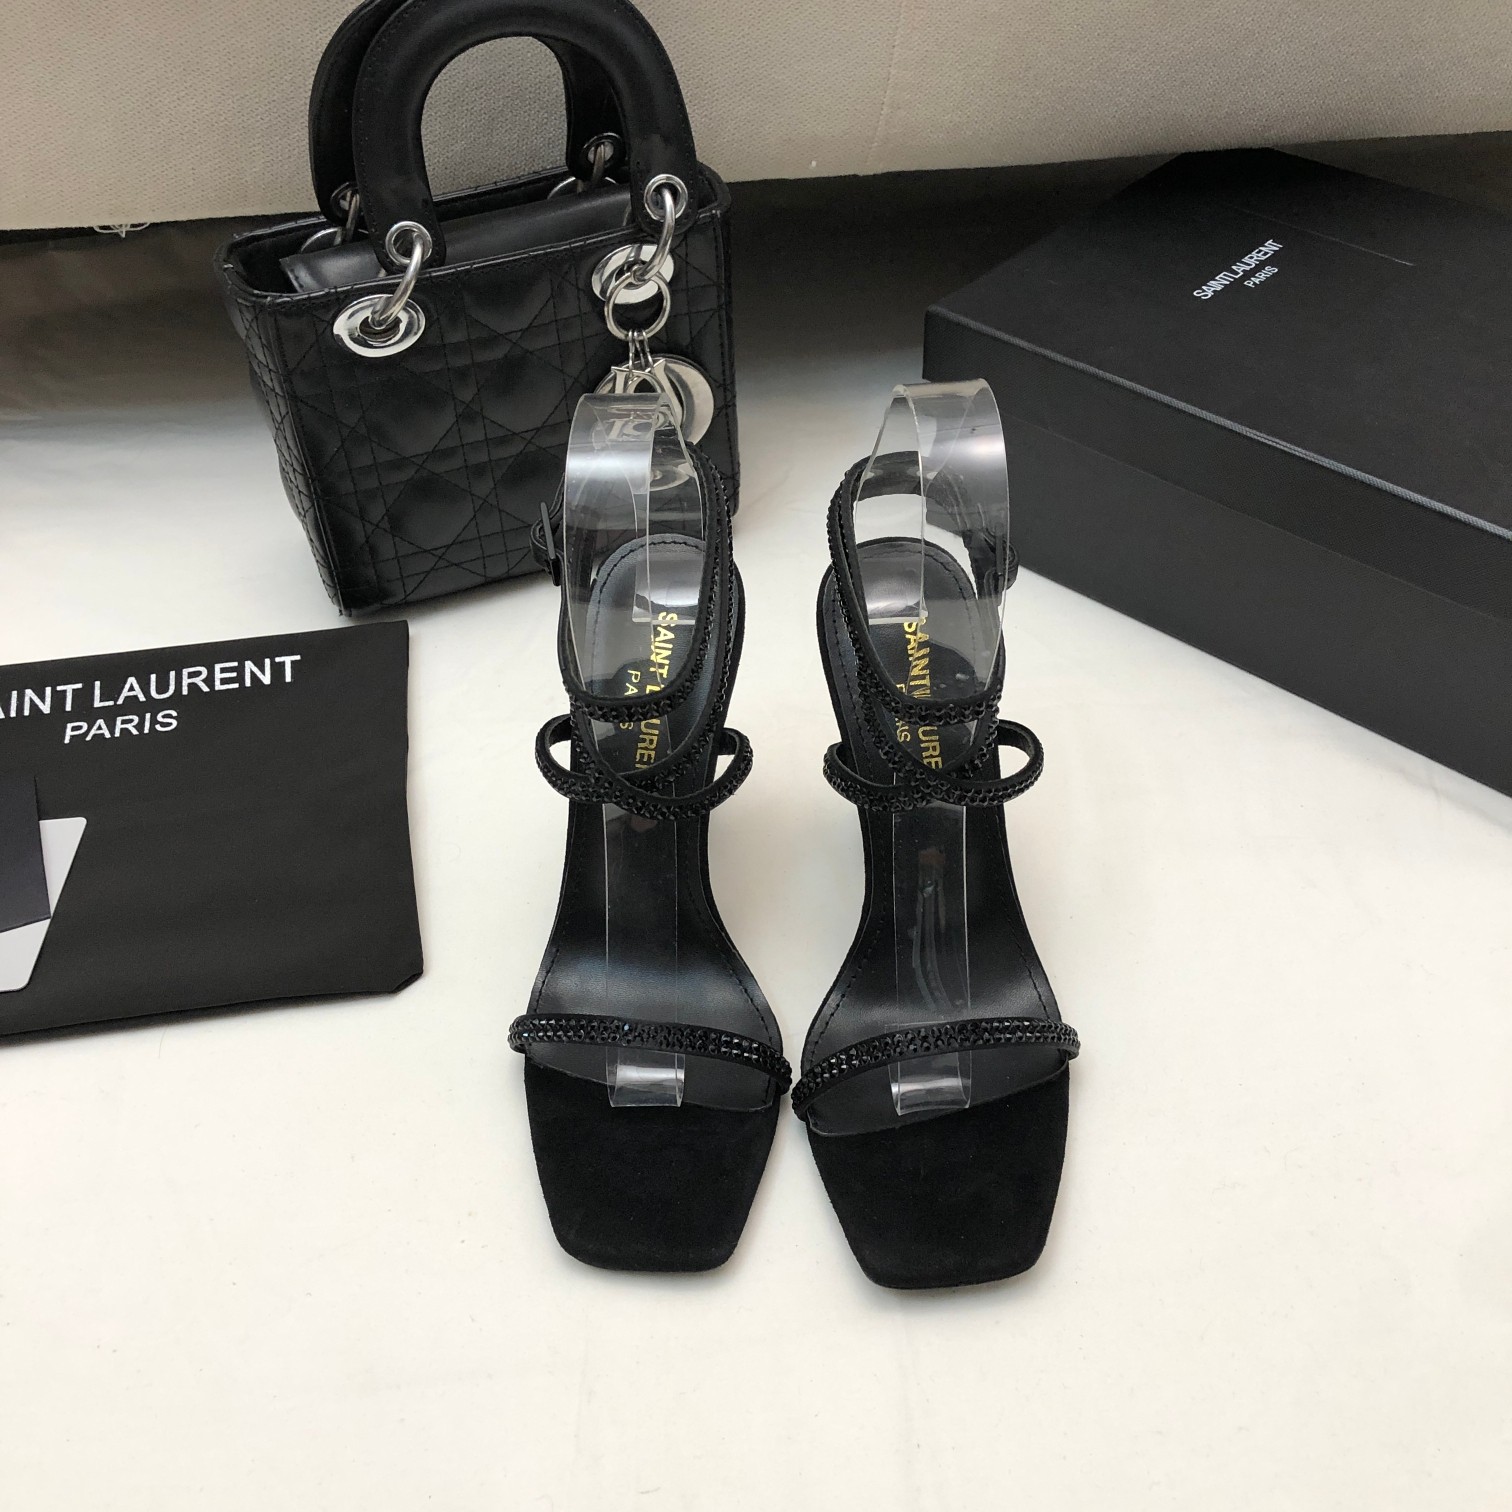 Yves Saint Laurent Shoes High Heel Pumps Sandals Most Desired
 Black White Genuine Leather Goat Skin Sheepskin Spring Collection